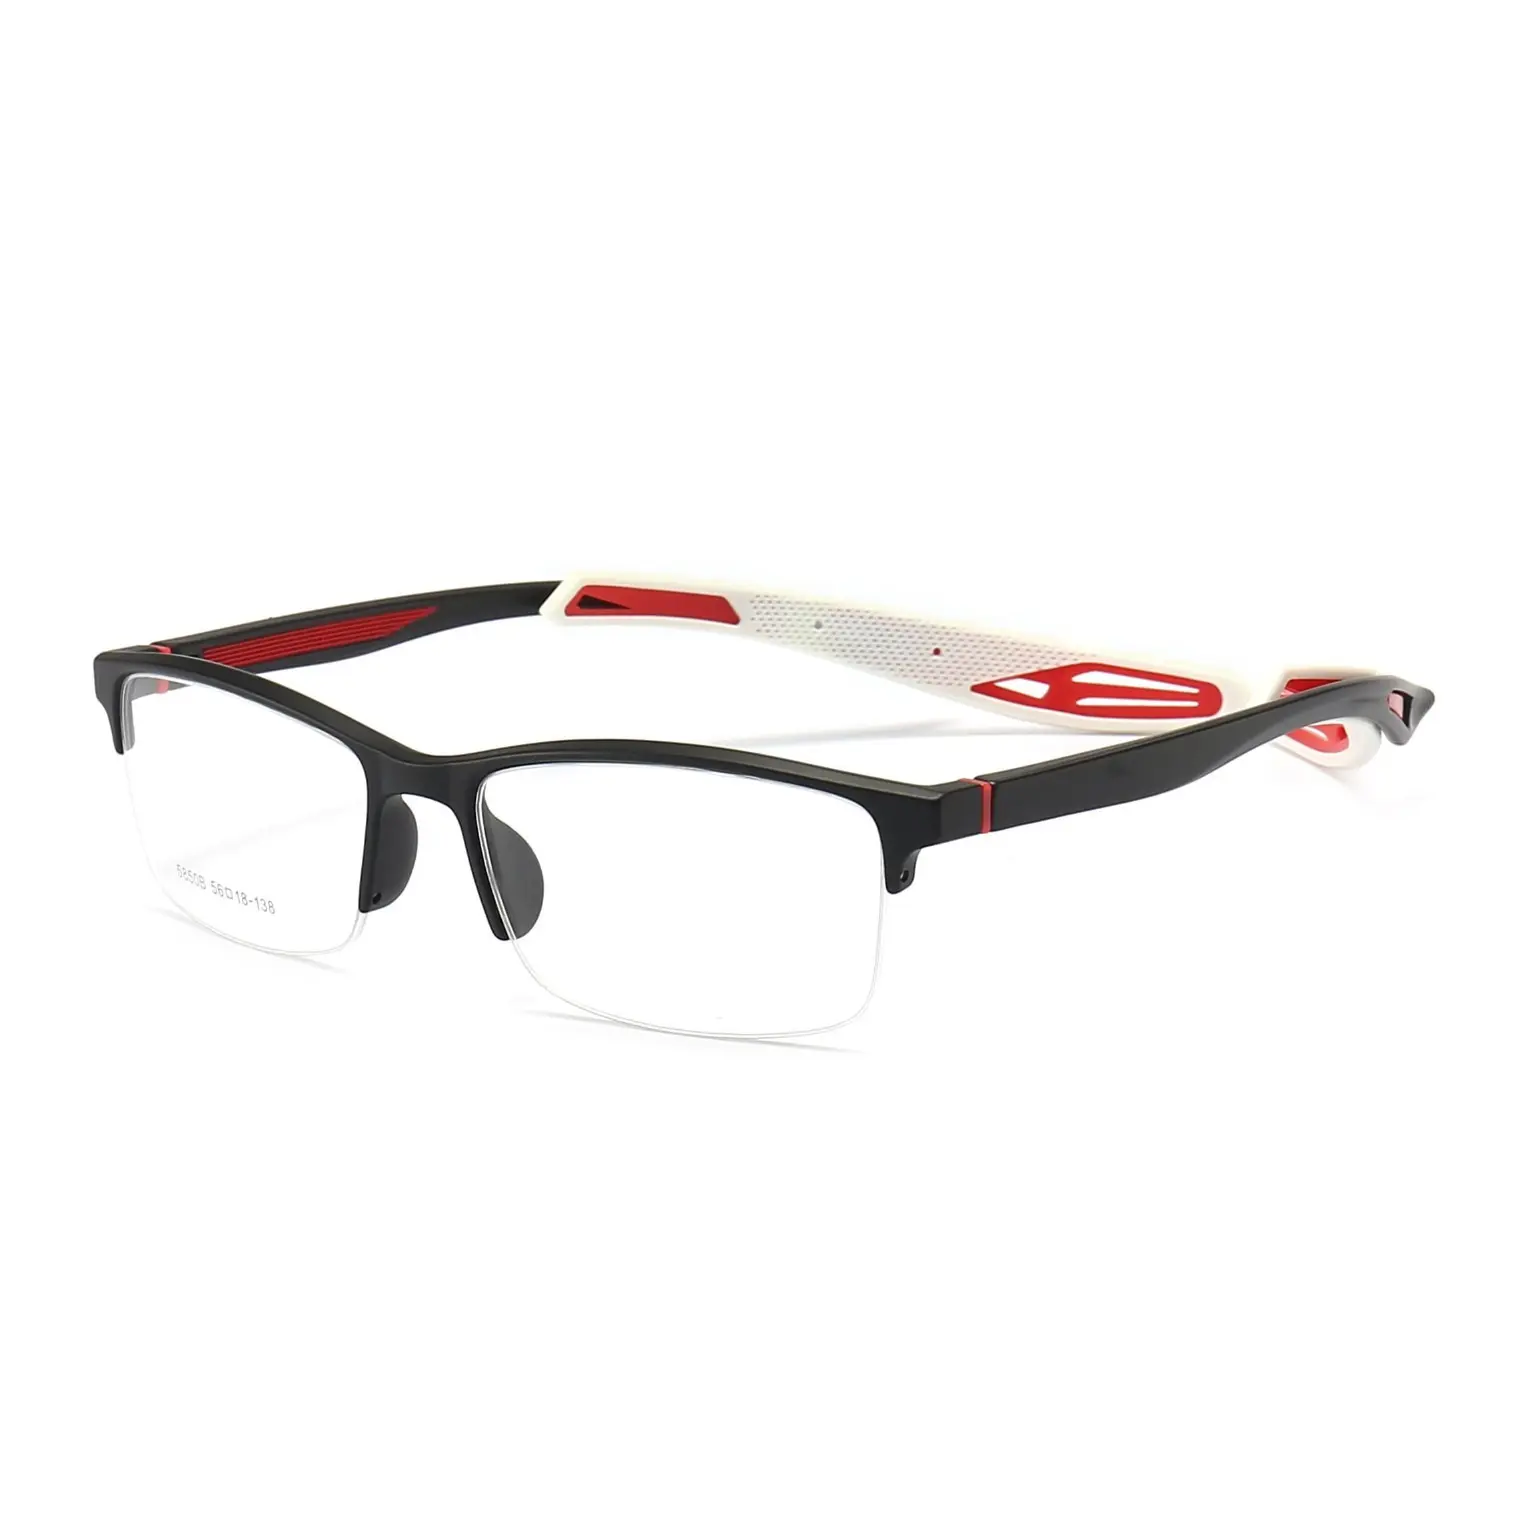 China Wholesale Eyeglass Frames Spectacle TR90 Half Rim Sport Optical Frames With Removable Temples